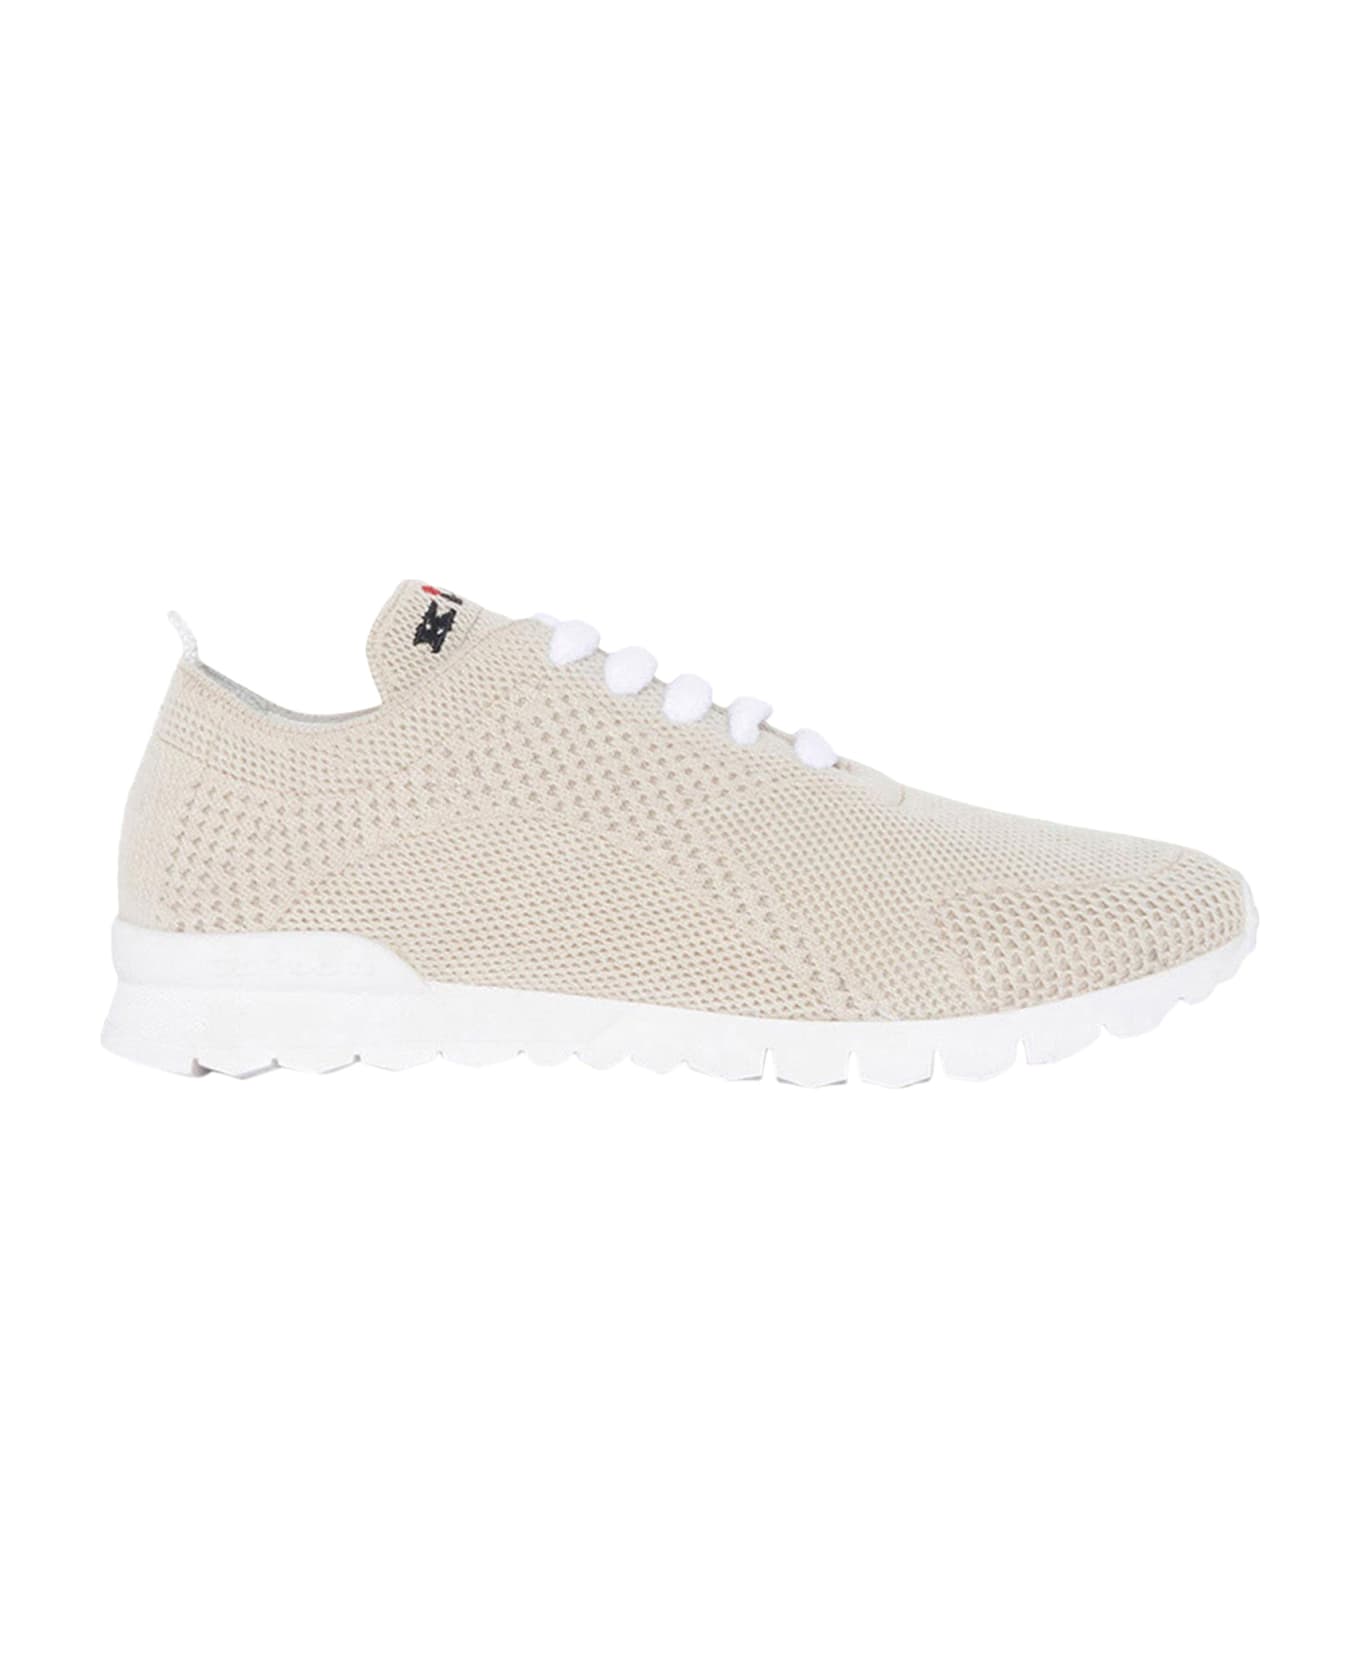 Kiton Sneakers Shoes Cashmere - BEIGE